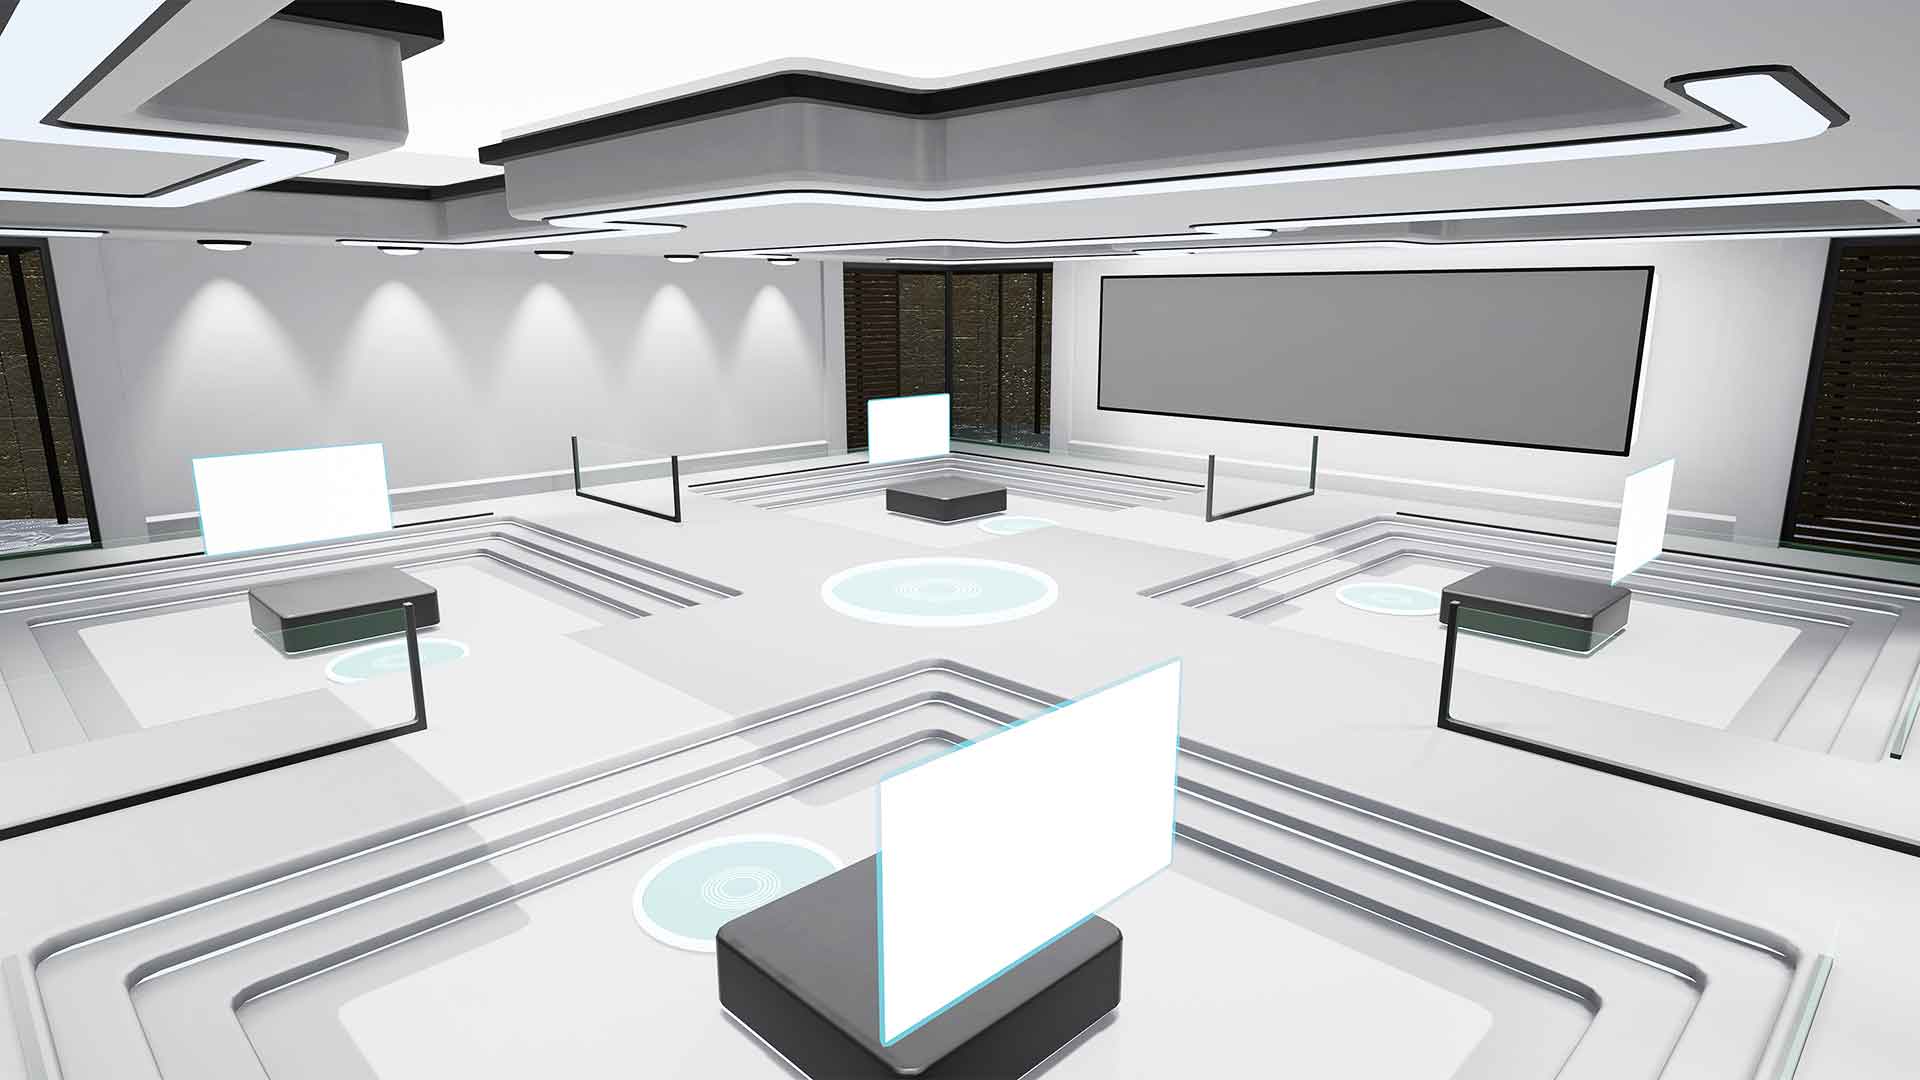 Our virtual showroom „Futuristic Museum“ features 5 rooms with different colors and plenty of space for your products, videos or other contents.